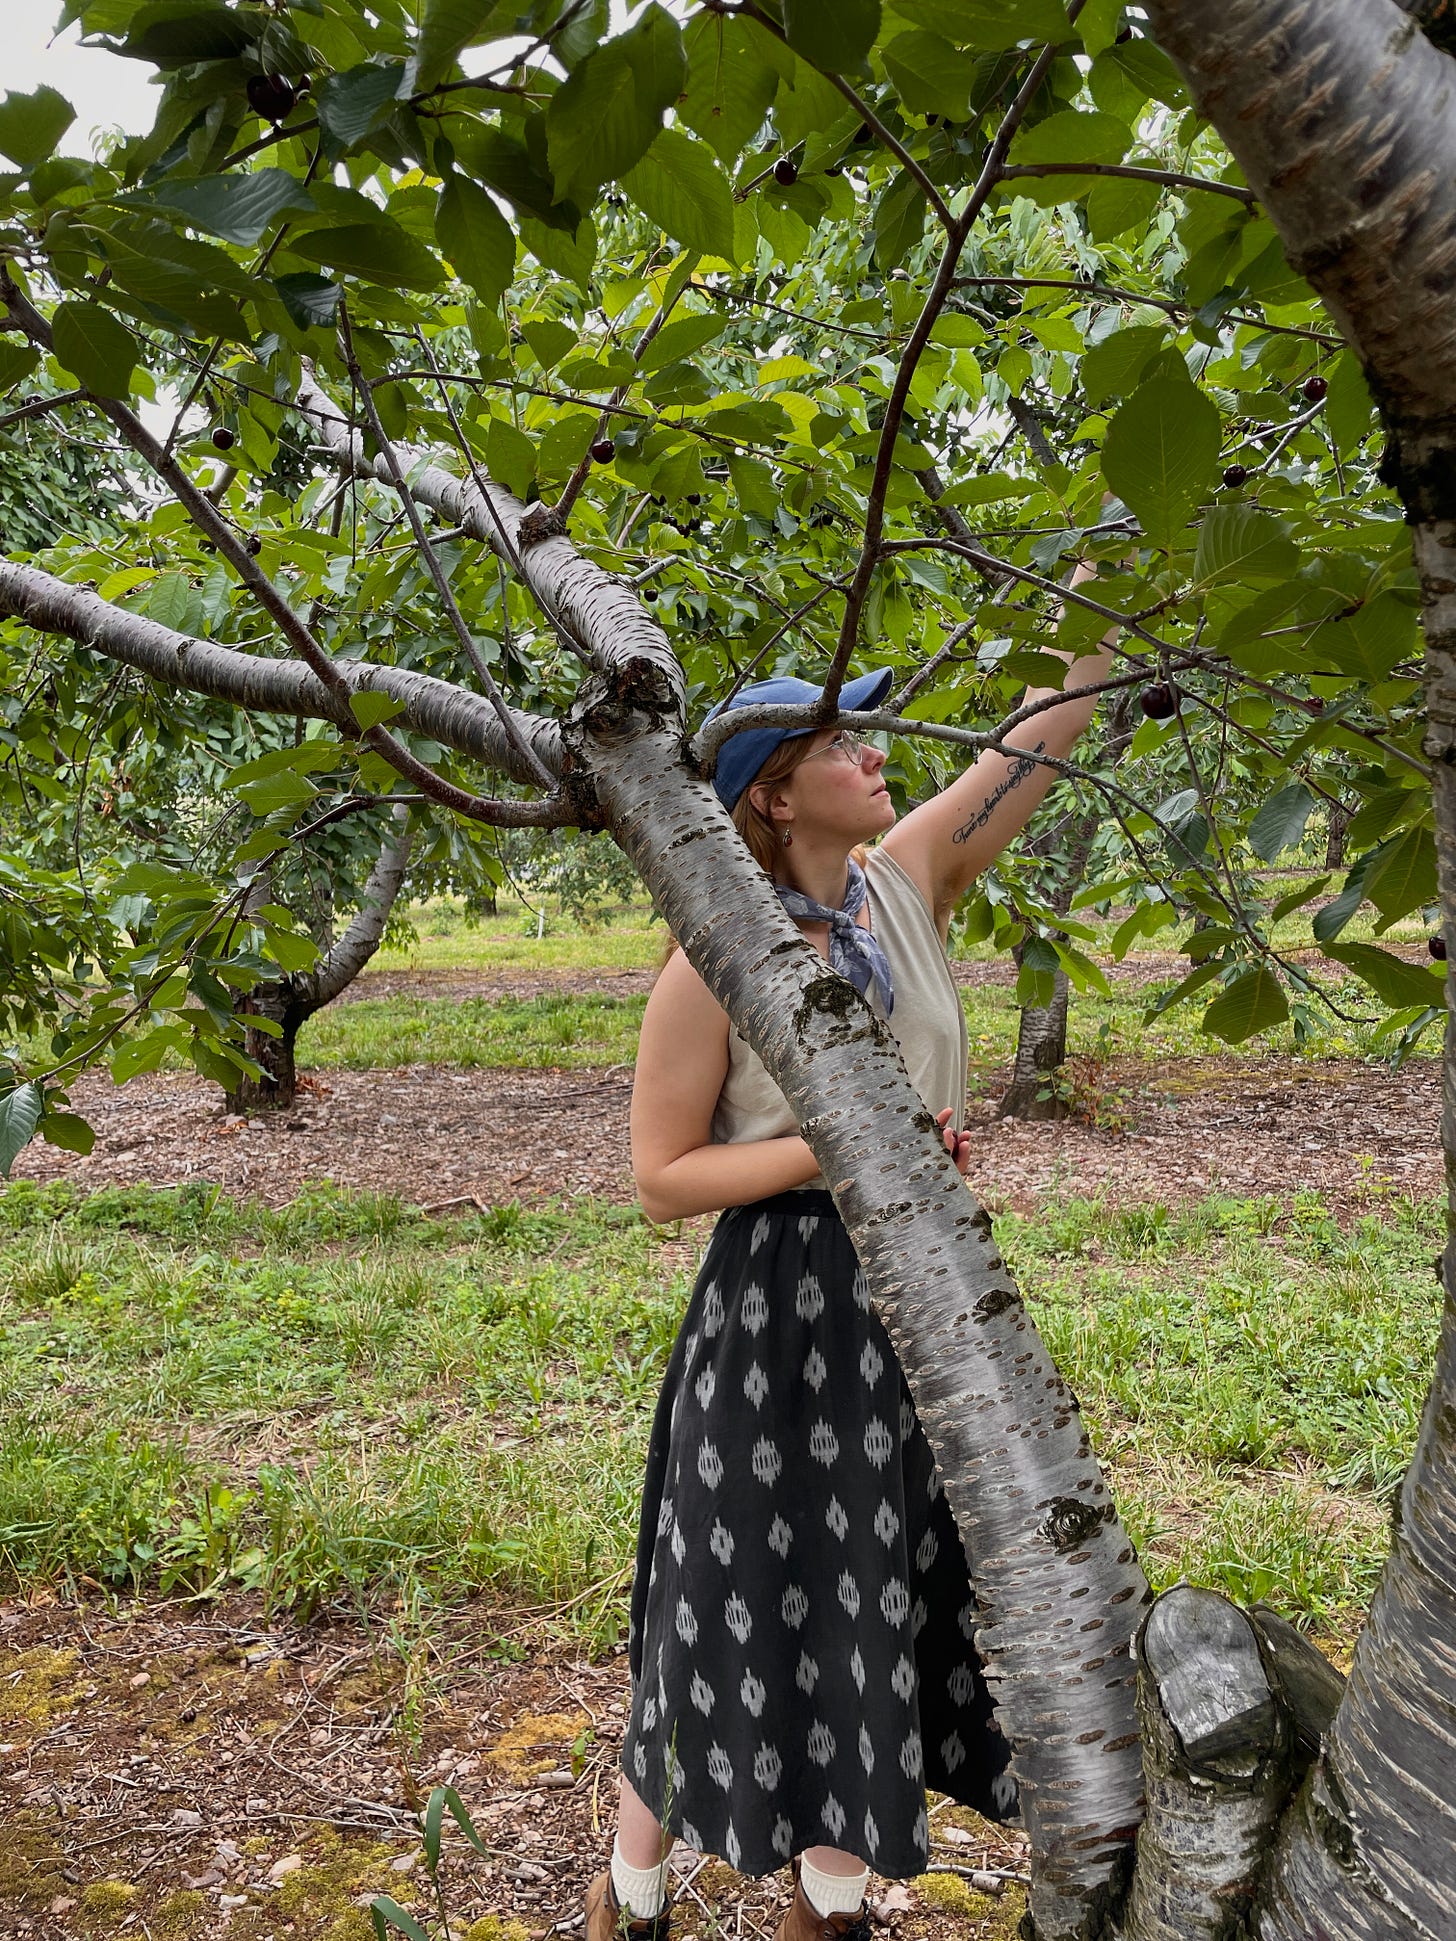 A 30 year old female wearing a blue baseball cap, blue bandana around her neck, tan linen tank top, black midi skirt and boots reaching up with her left arm which is tattooed to pick a cherry in a cherry orchard on a hazy day.